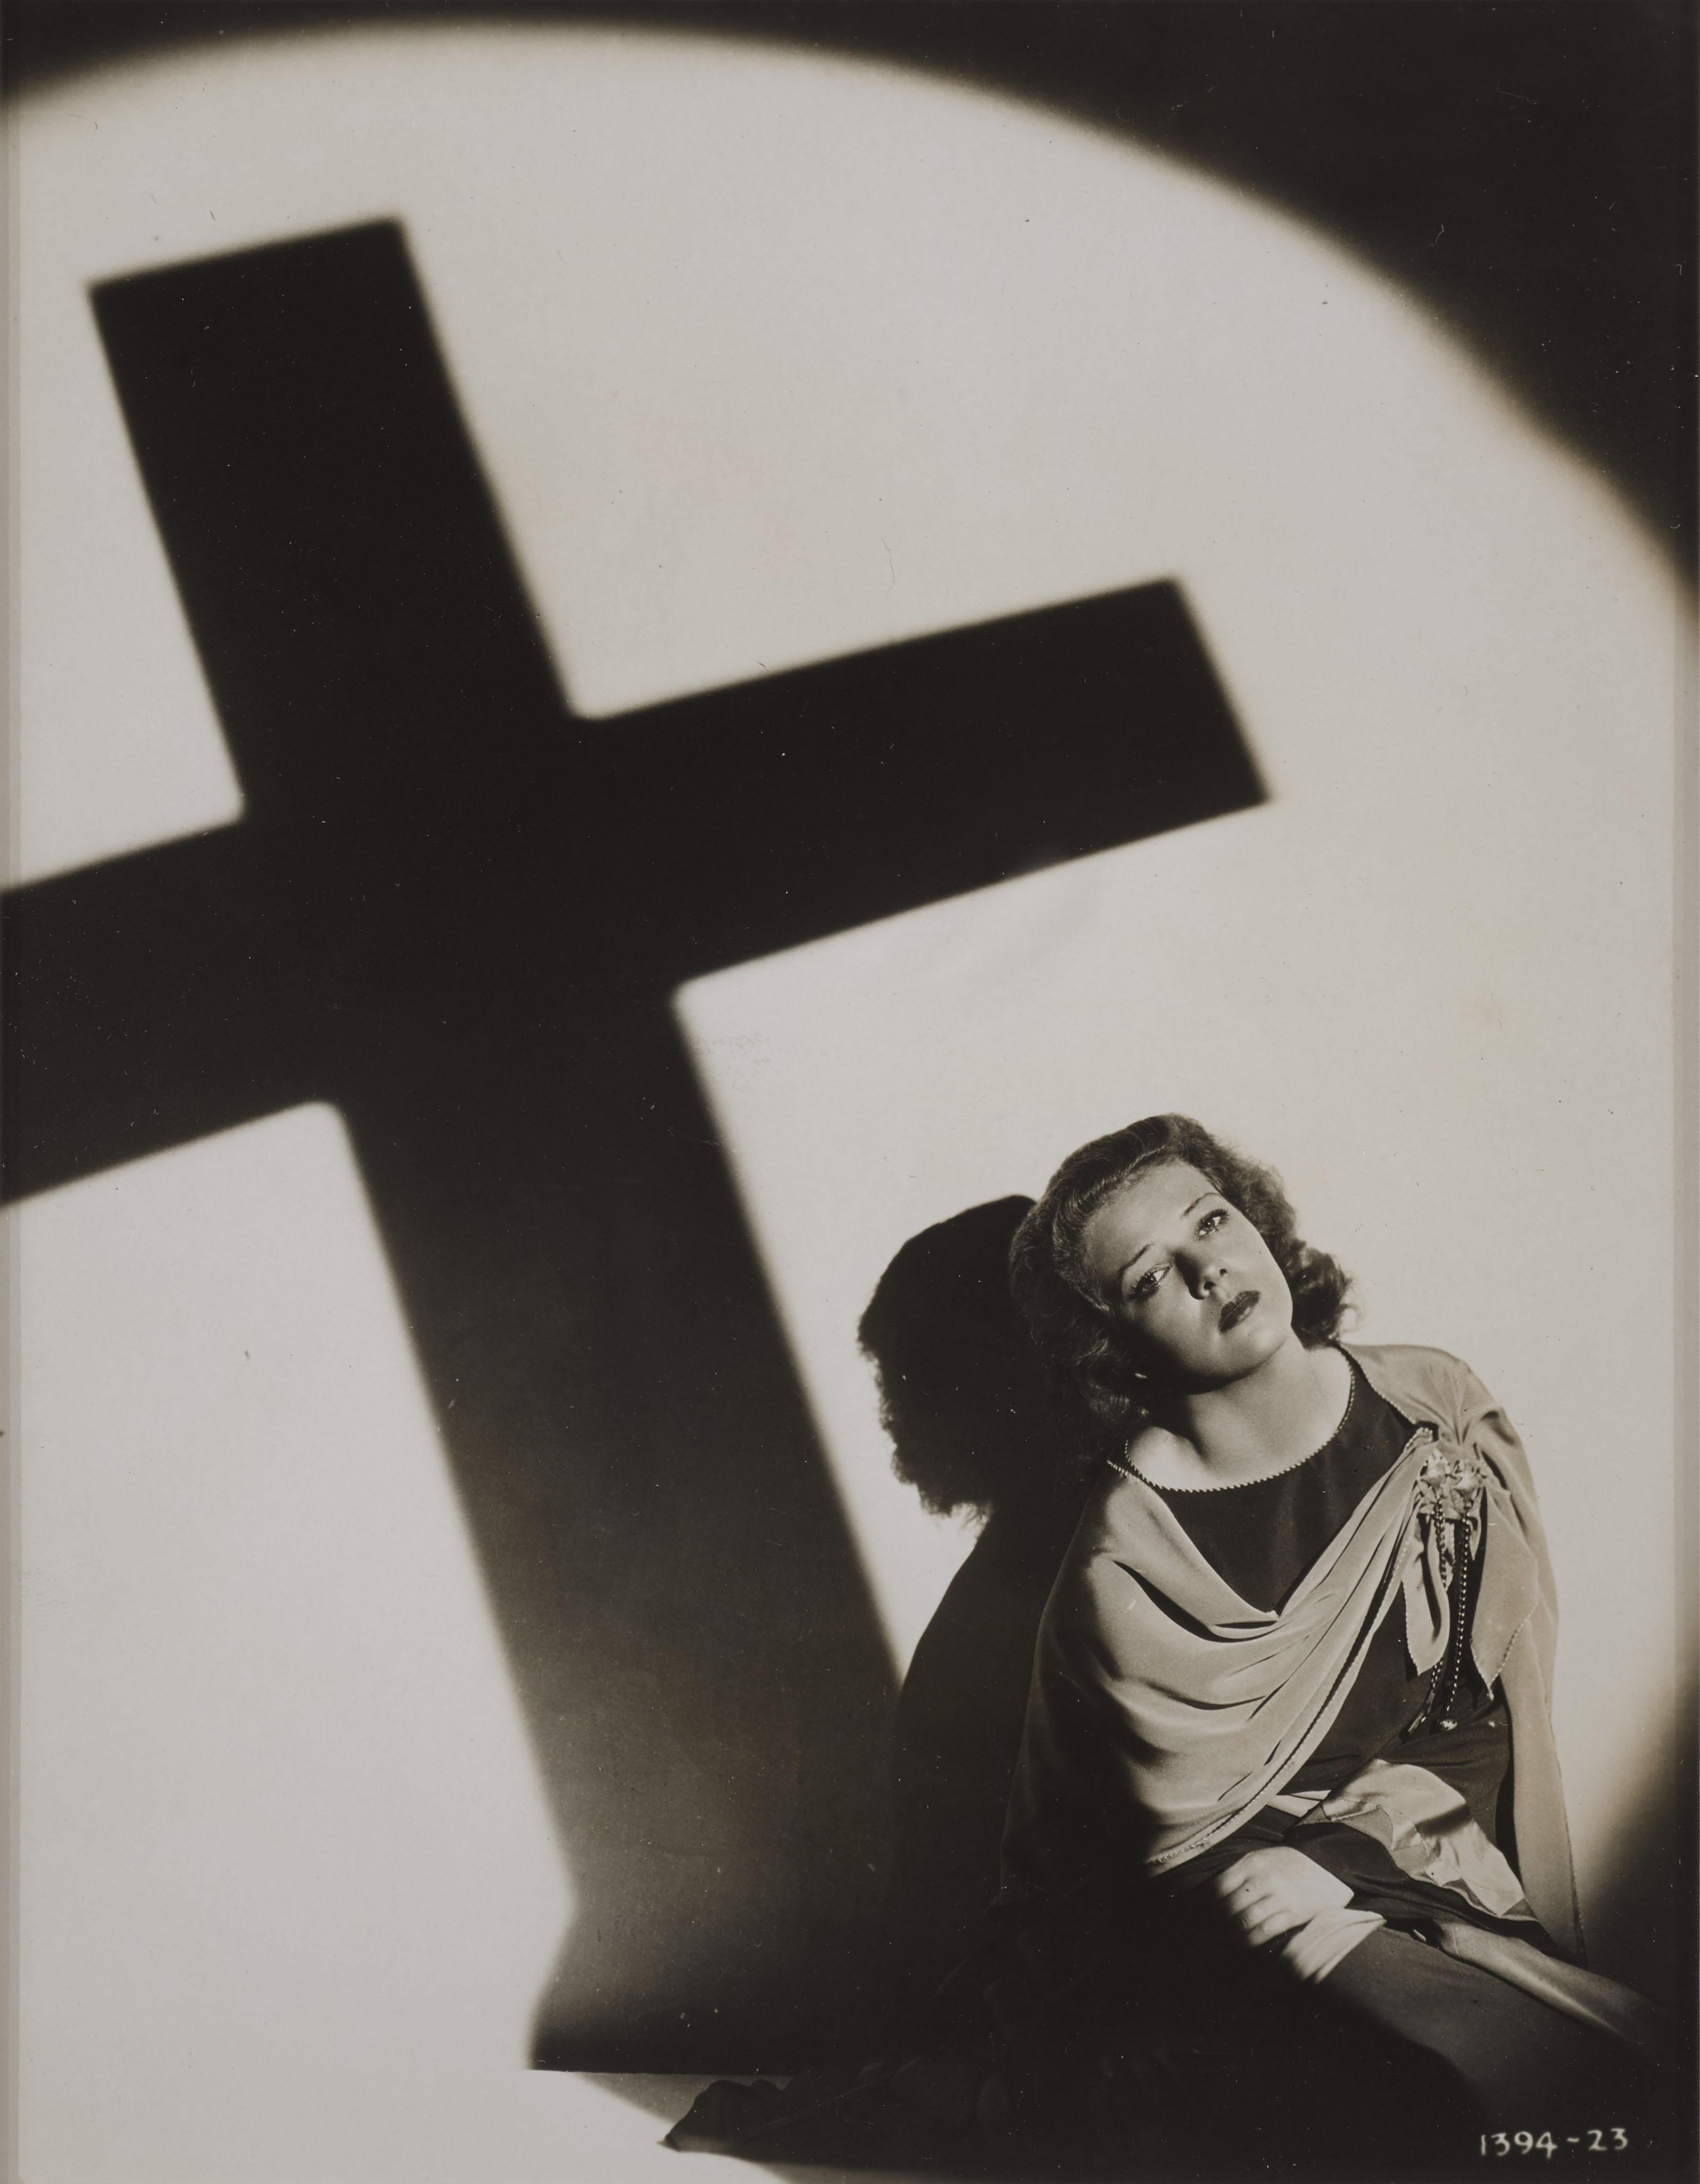 Original US black and white photographic production still for the 1932 film The Sign of the Cross.
This still was sent out to newspapers to advertise the re-release.
The film was directed by Cecil B. DeMille and starred Fredric March, Claudette